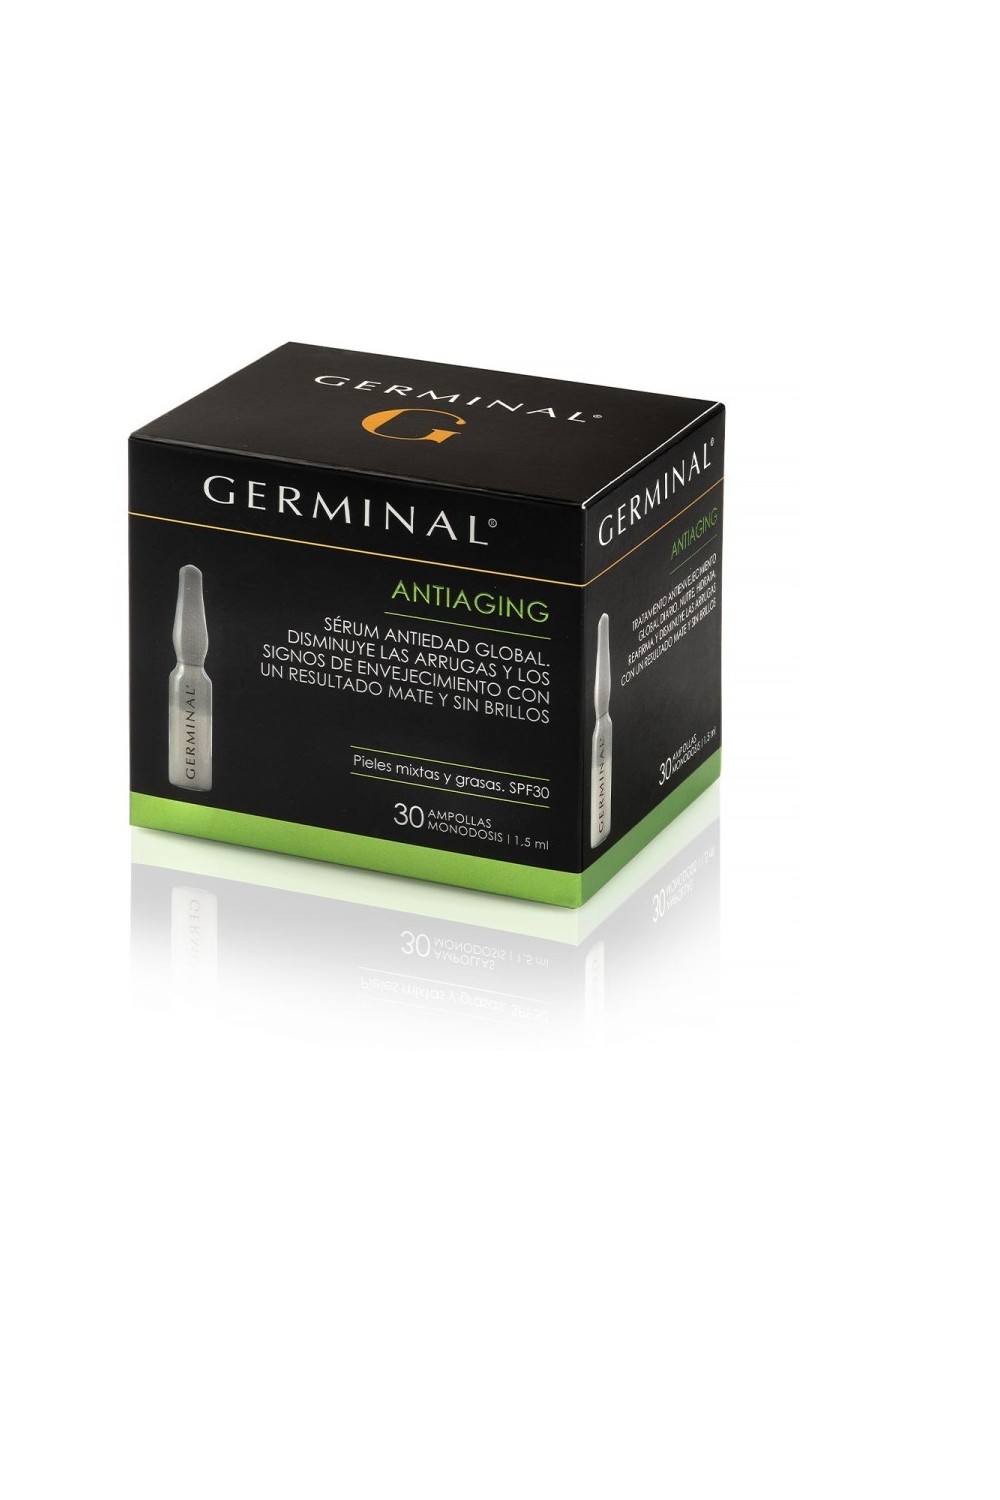 Germinal Deep Action Anti-Aging Mixed Skins and Fats 30 Blisters